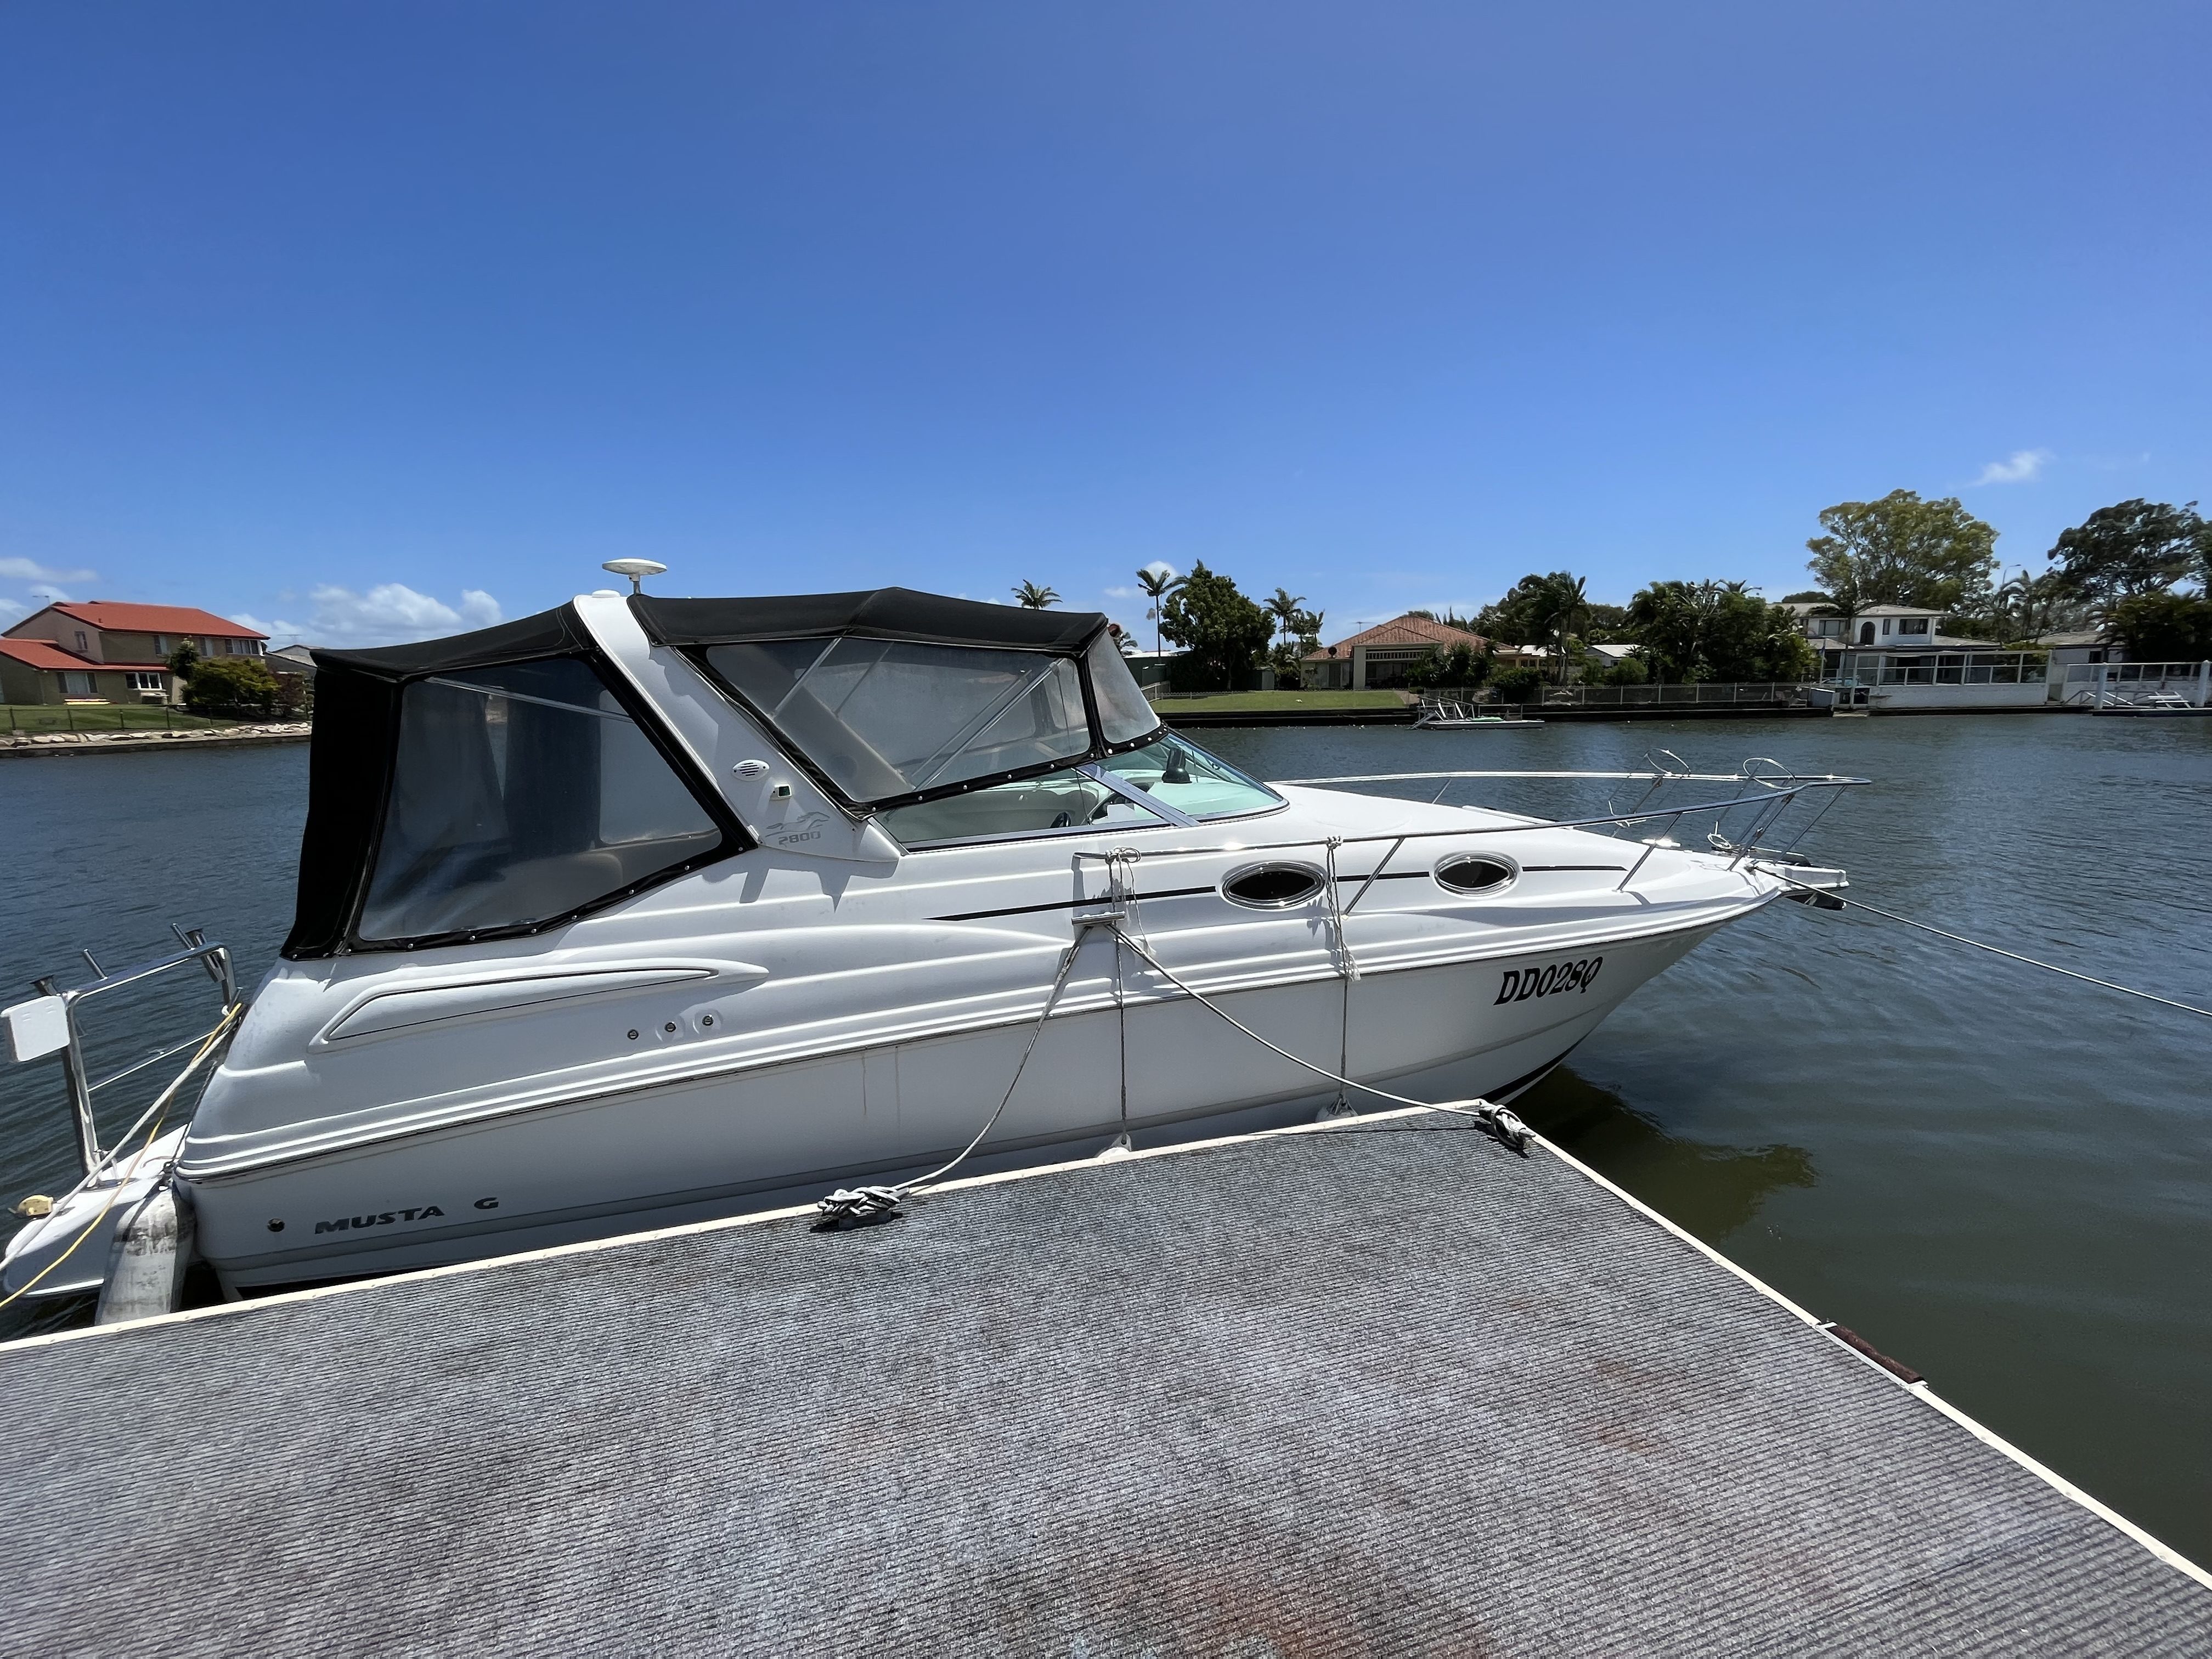 2008 Launched Mustang 2800.- Owner Requires Vessel Sold